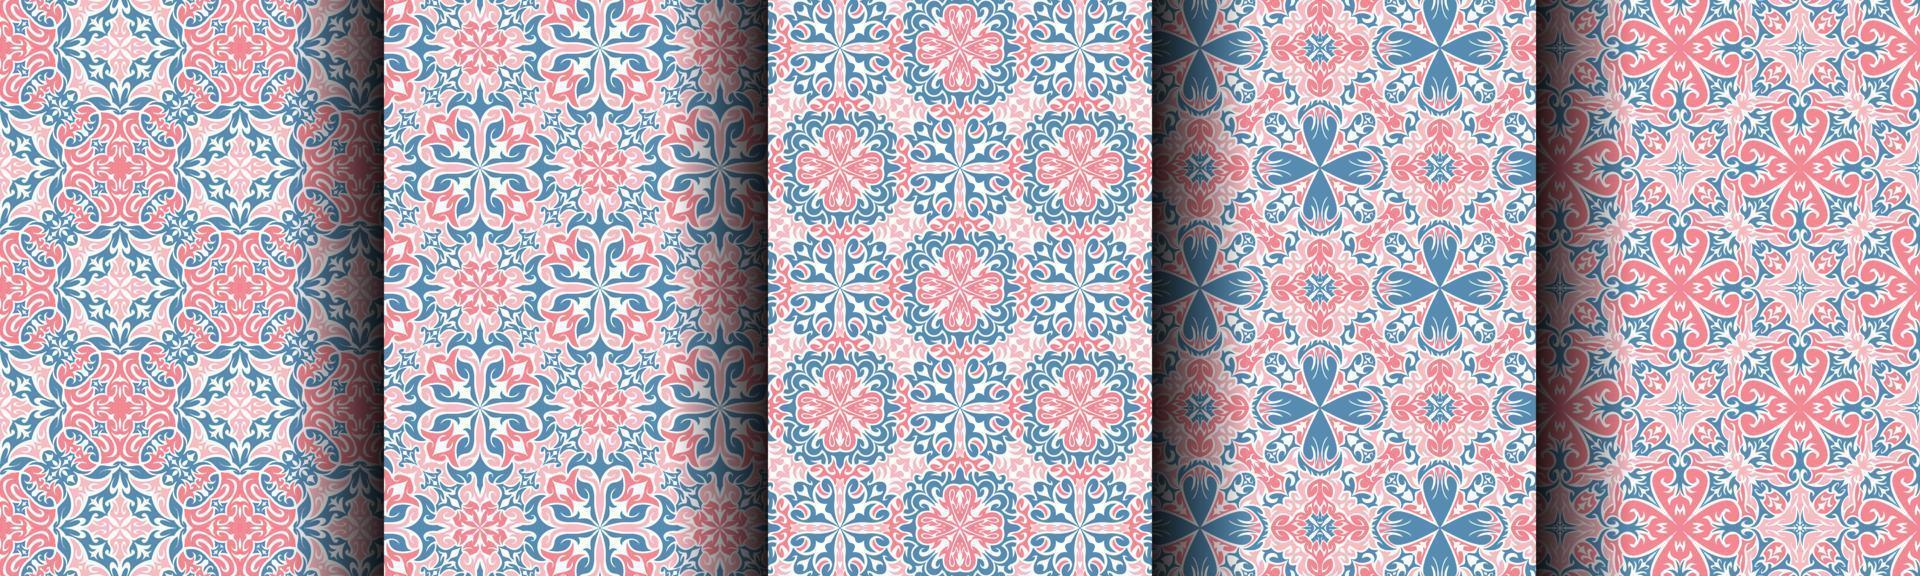 traditional ethnic pink bundle pattern background vector